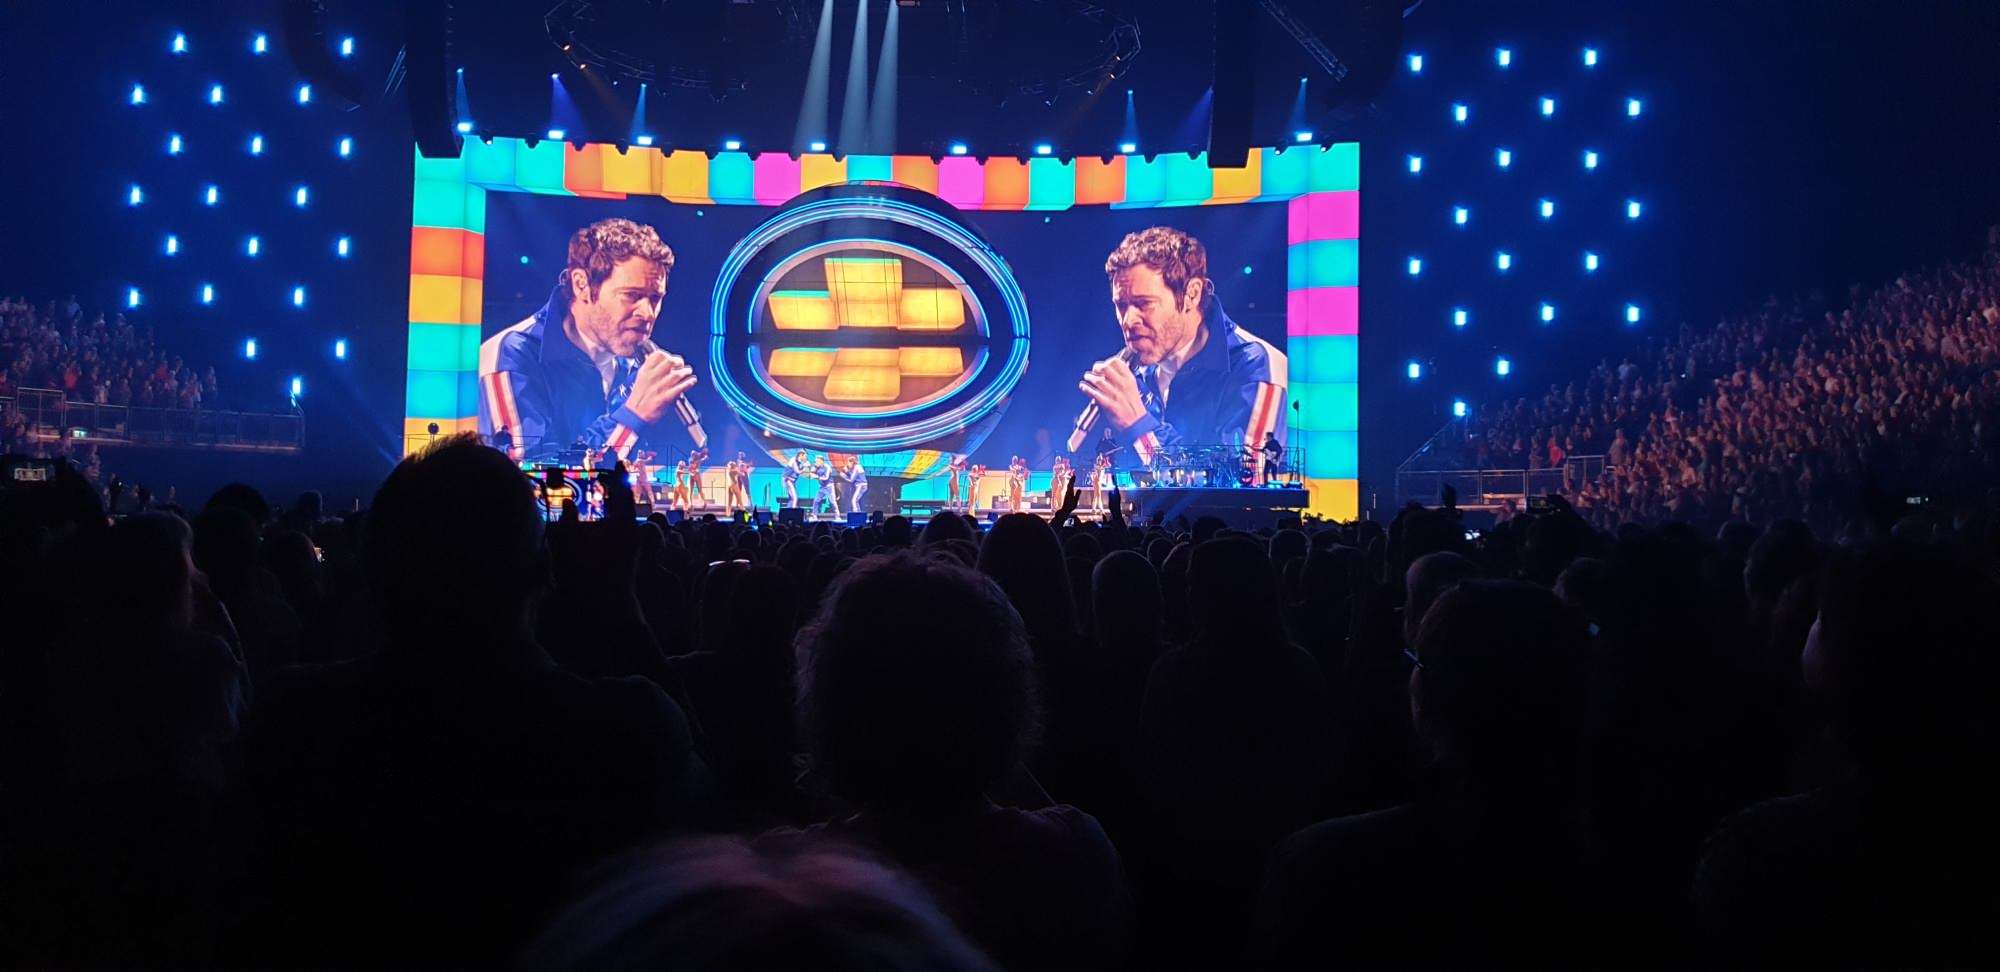 View of Take That - Greatest Hits Tour 2019 at The O2 Arena from Seat Block C3